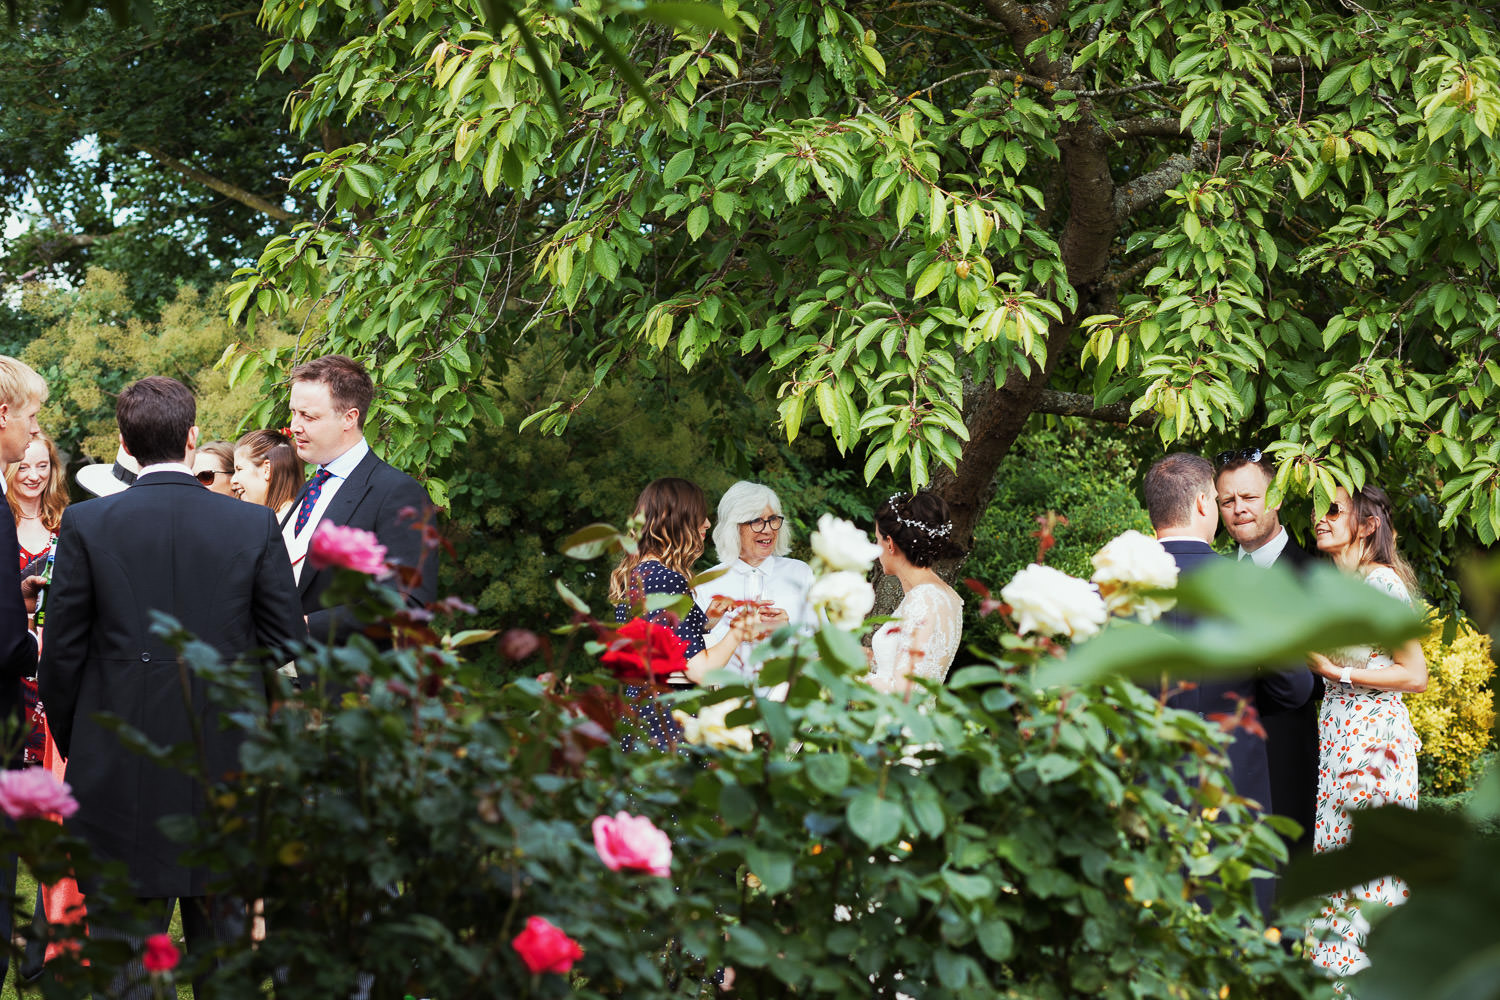 People in a garden at a wedding under the trees.